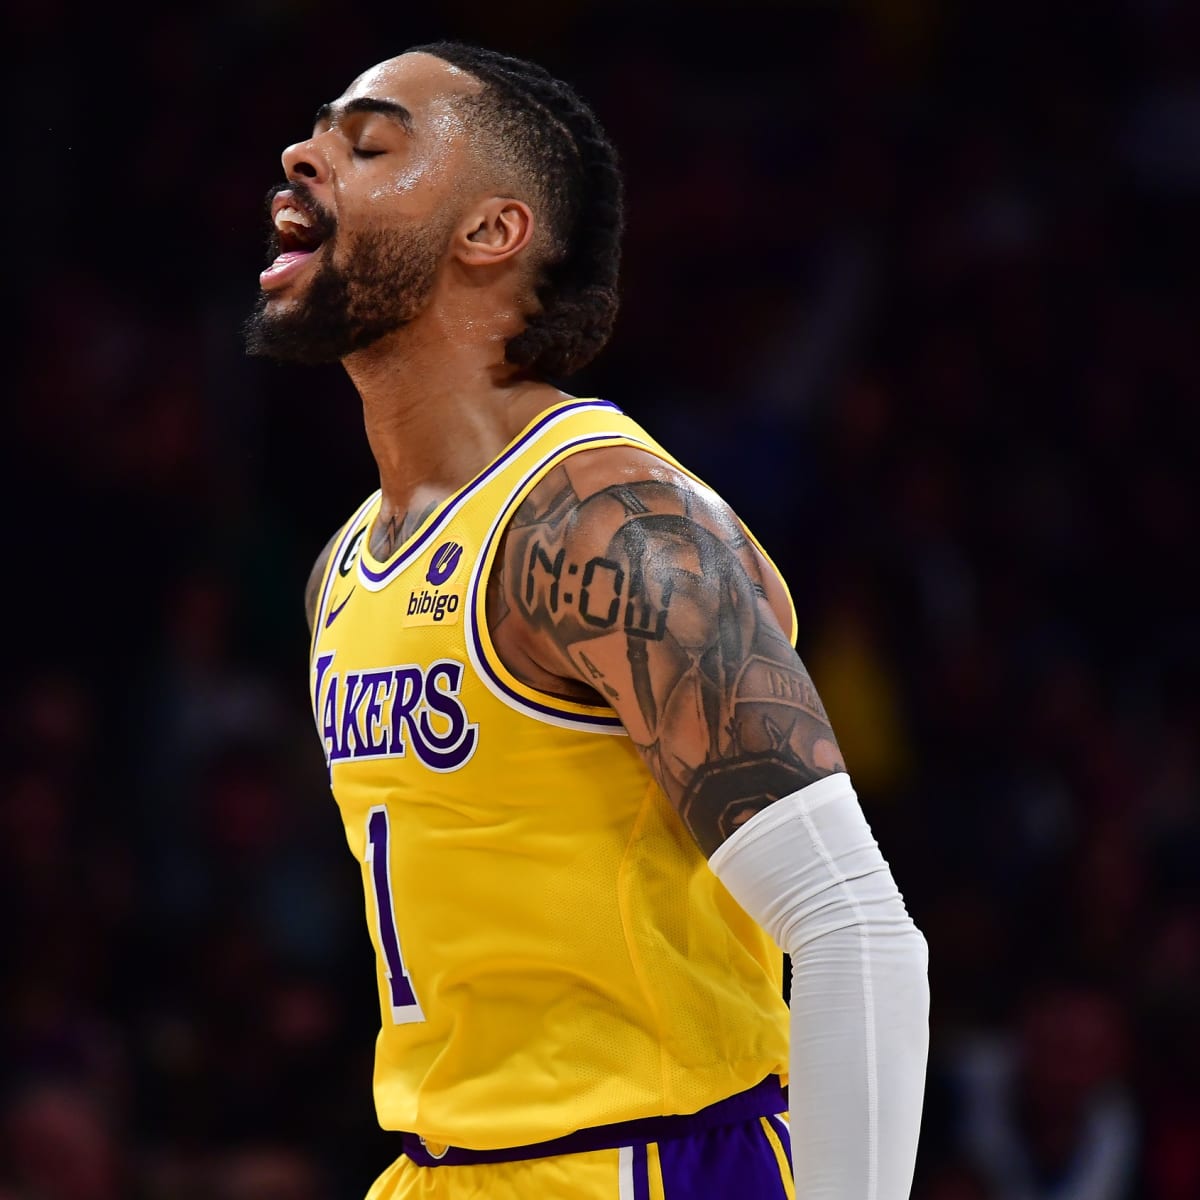 Lakers hold off Warriors in thrilling D'Angelo Russell homecoming